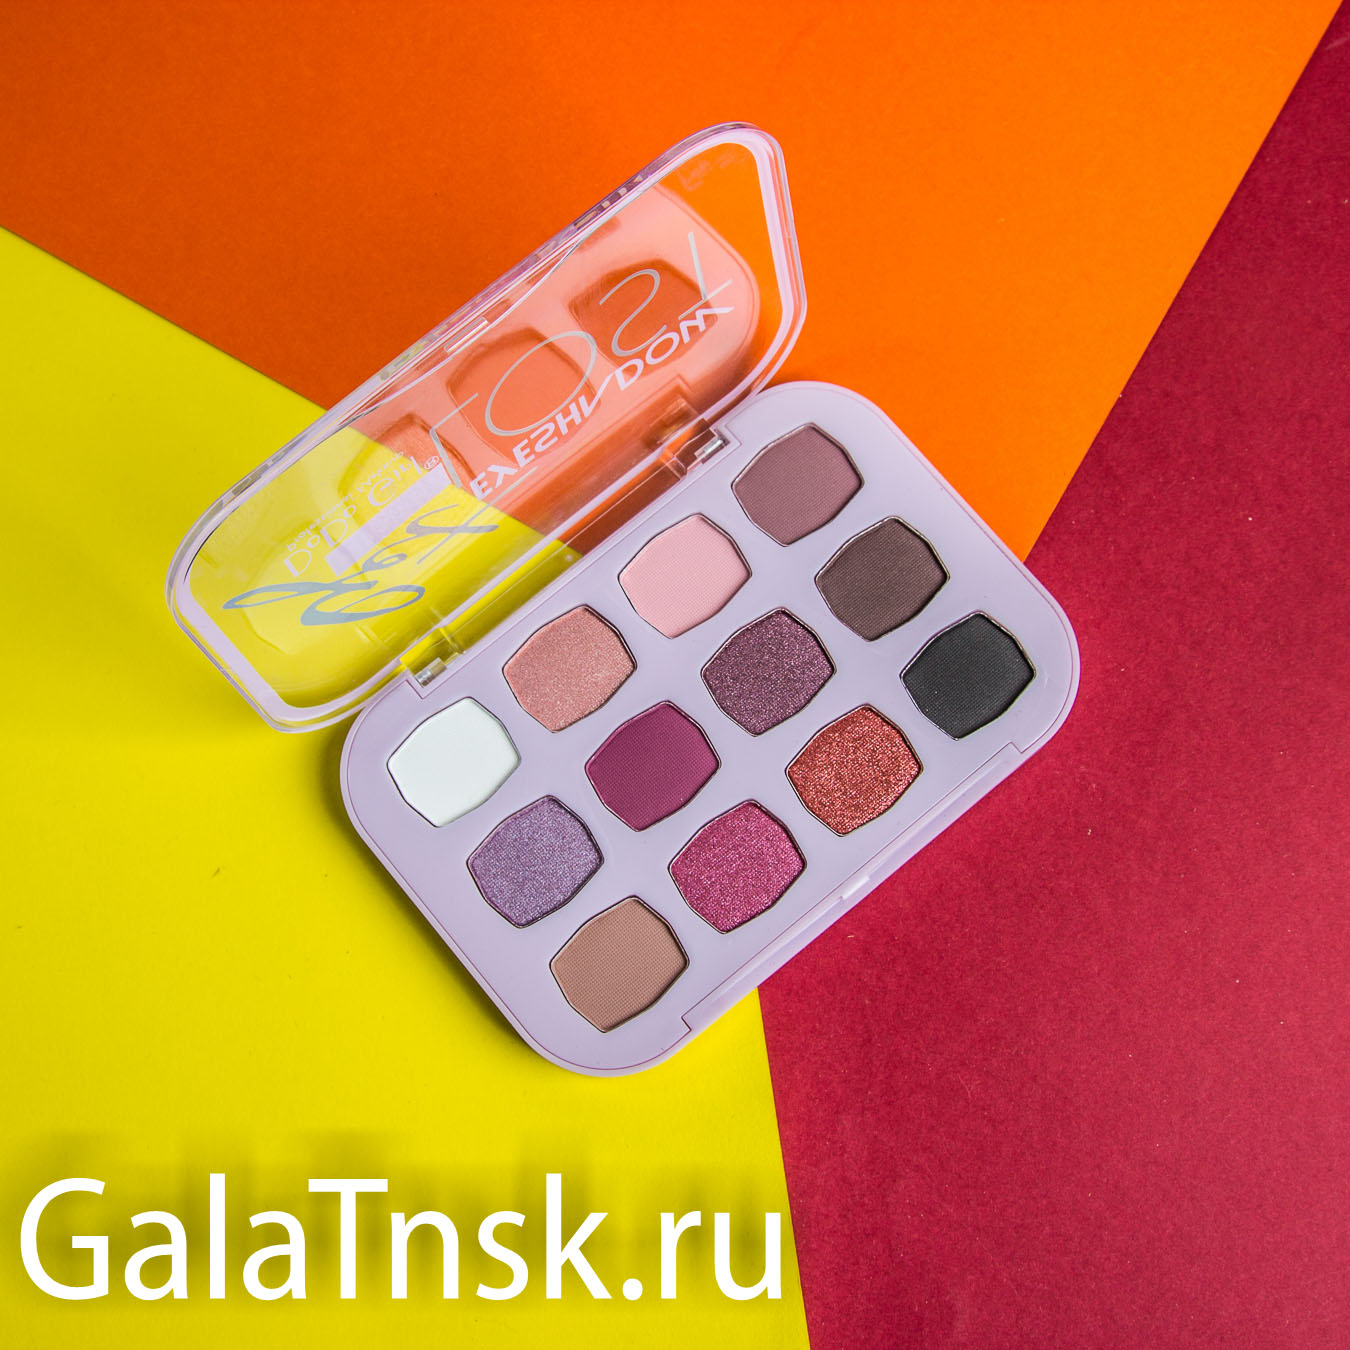 DO DO GIPL Тени GET EYESHADOW LOST 12colors D3254 01